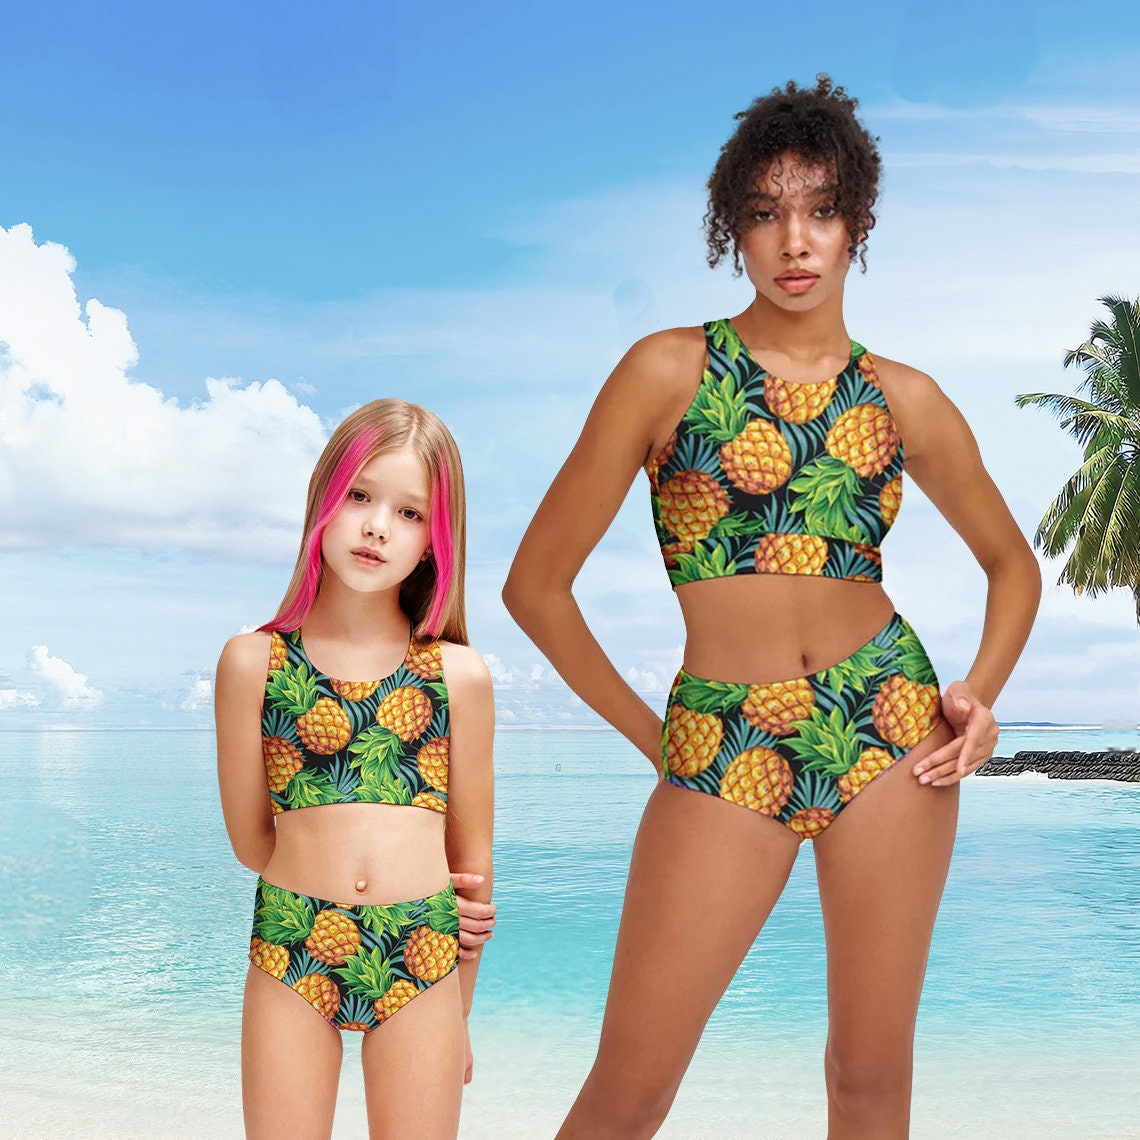 Electric Jungle Navy Blue Two-Piece Sporty Swimsuits - Mommy and Me